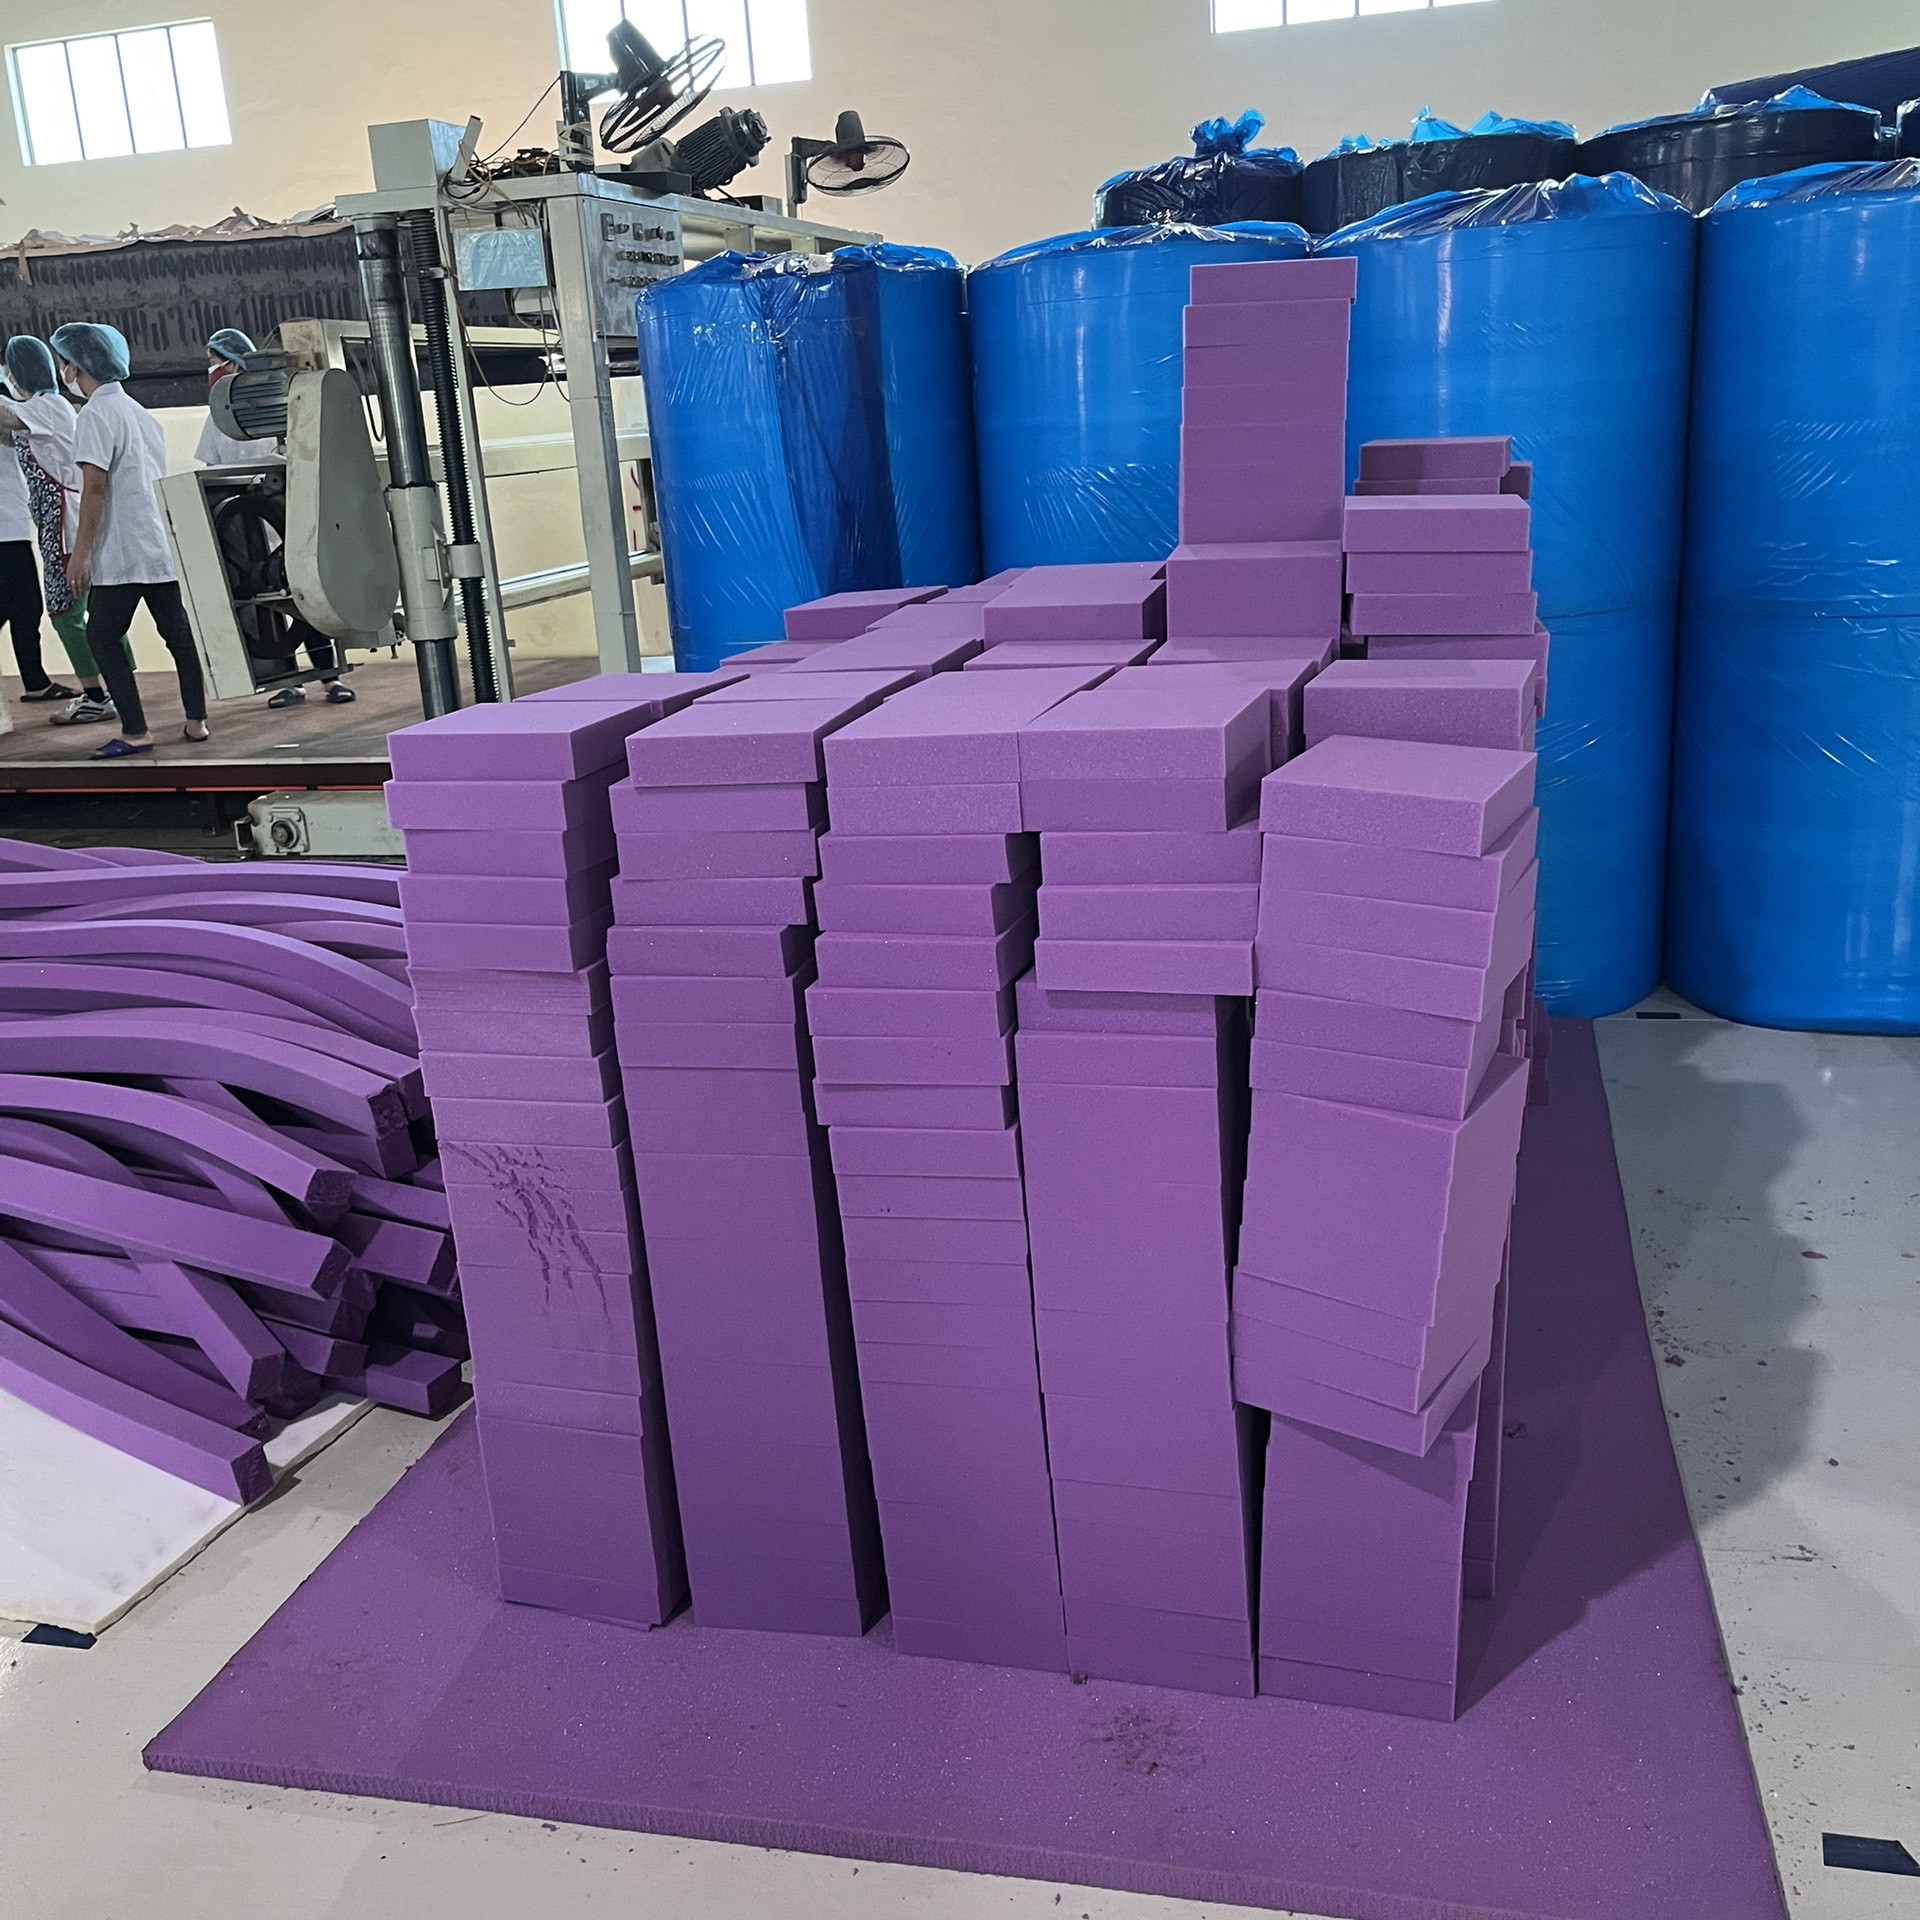 Polyurethane Foam Furniture Fast Delivery Non-Toxic Packaging Industry Resistant Shock Proof Pallets from Vietnam Manufacturer 6